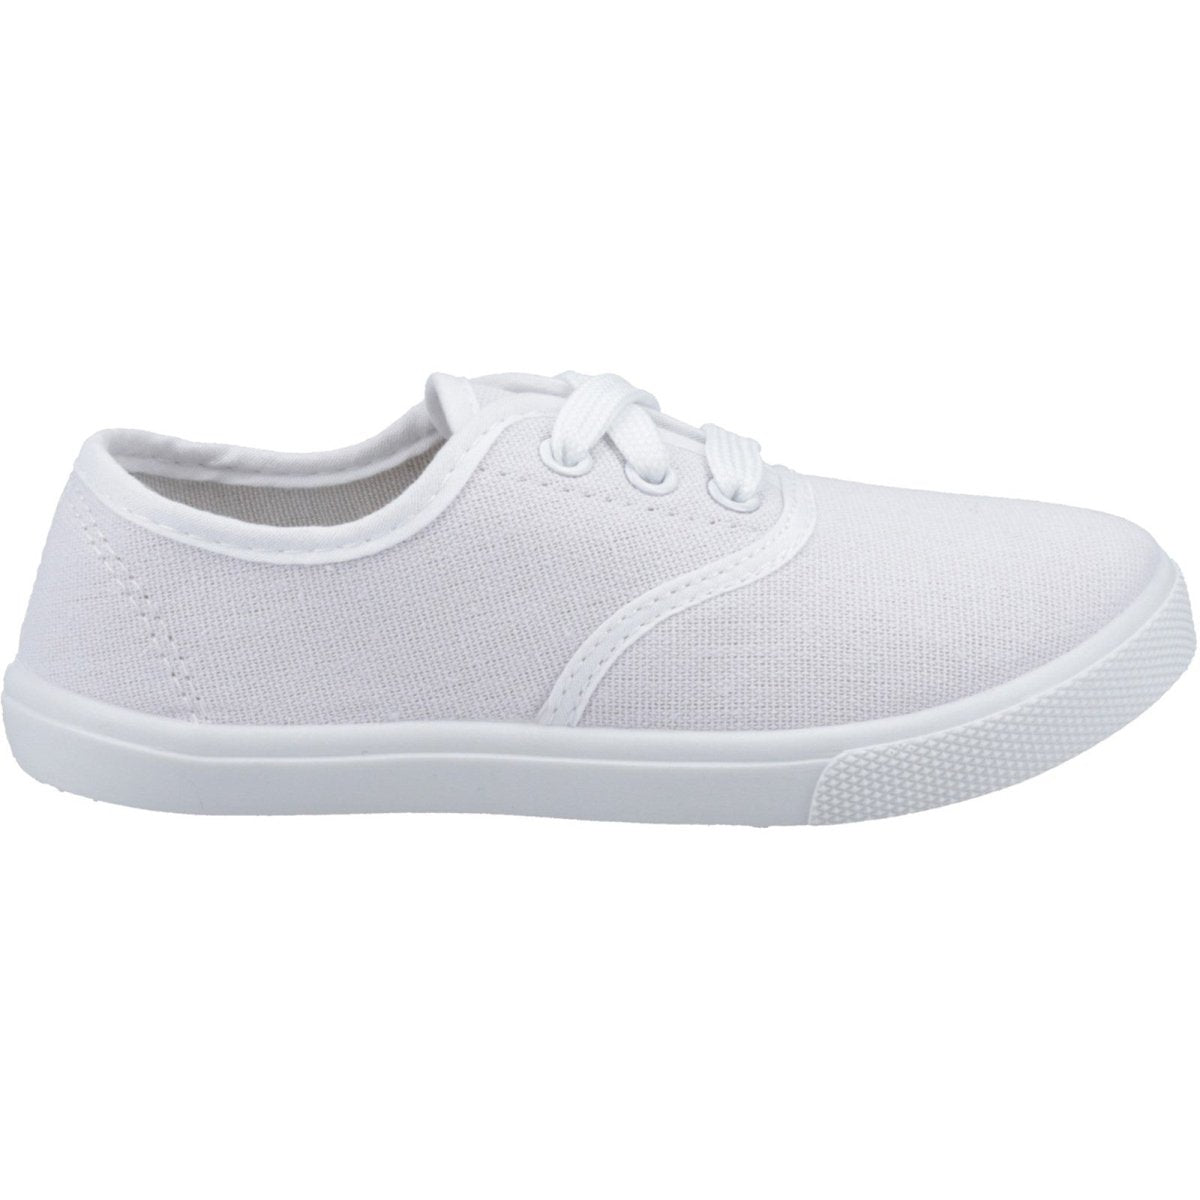 Group Five GB Toddlers Plimsolls - Shoe Store Direct